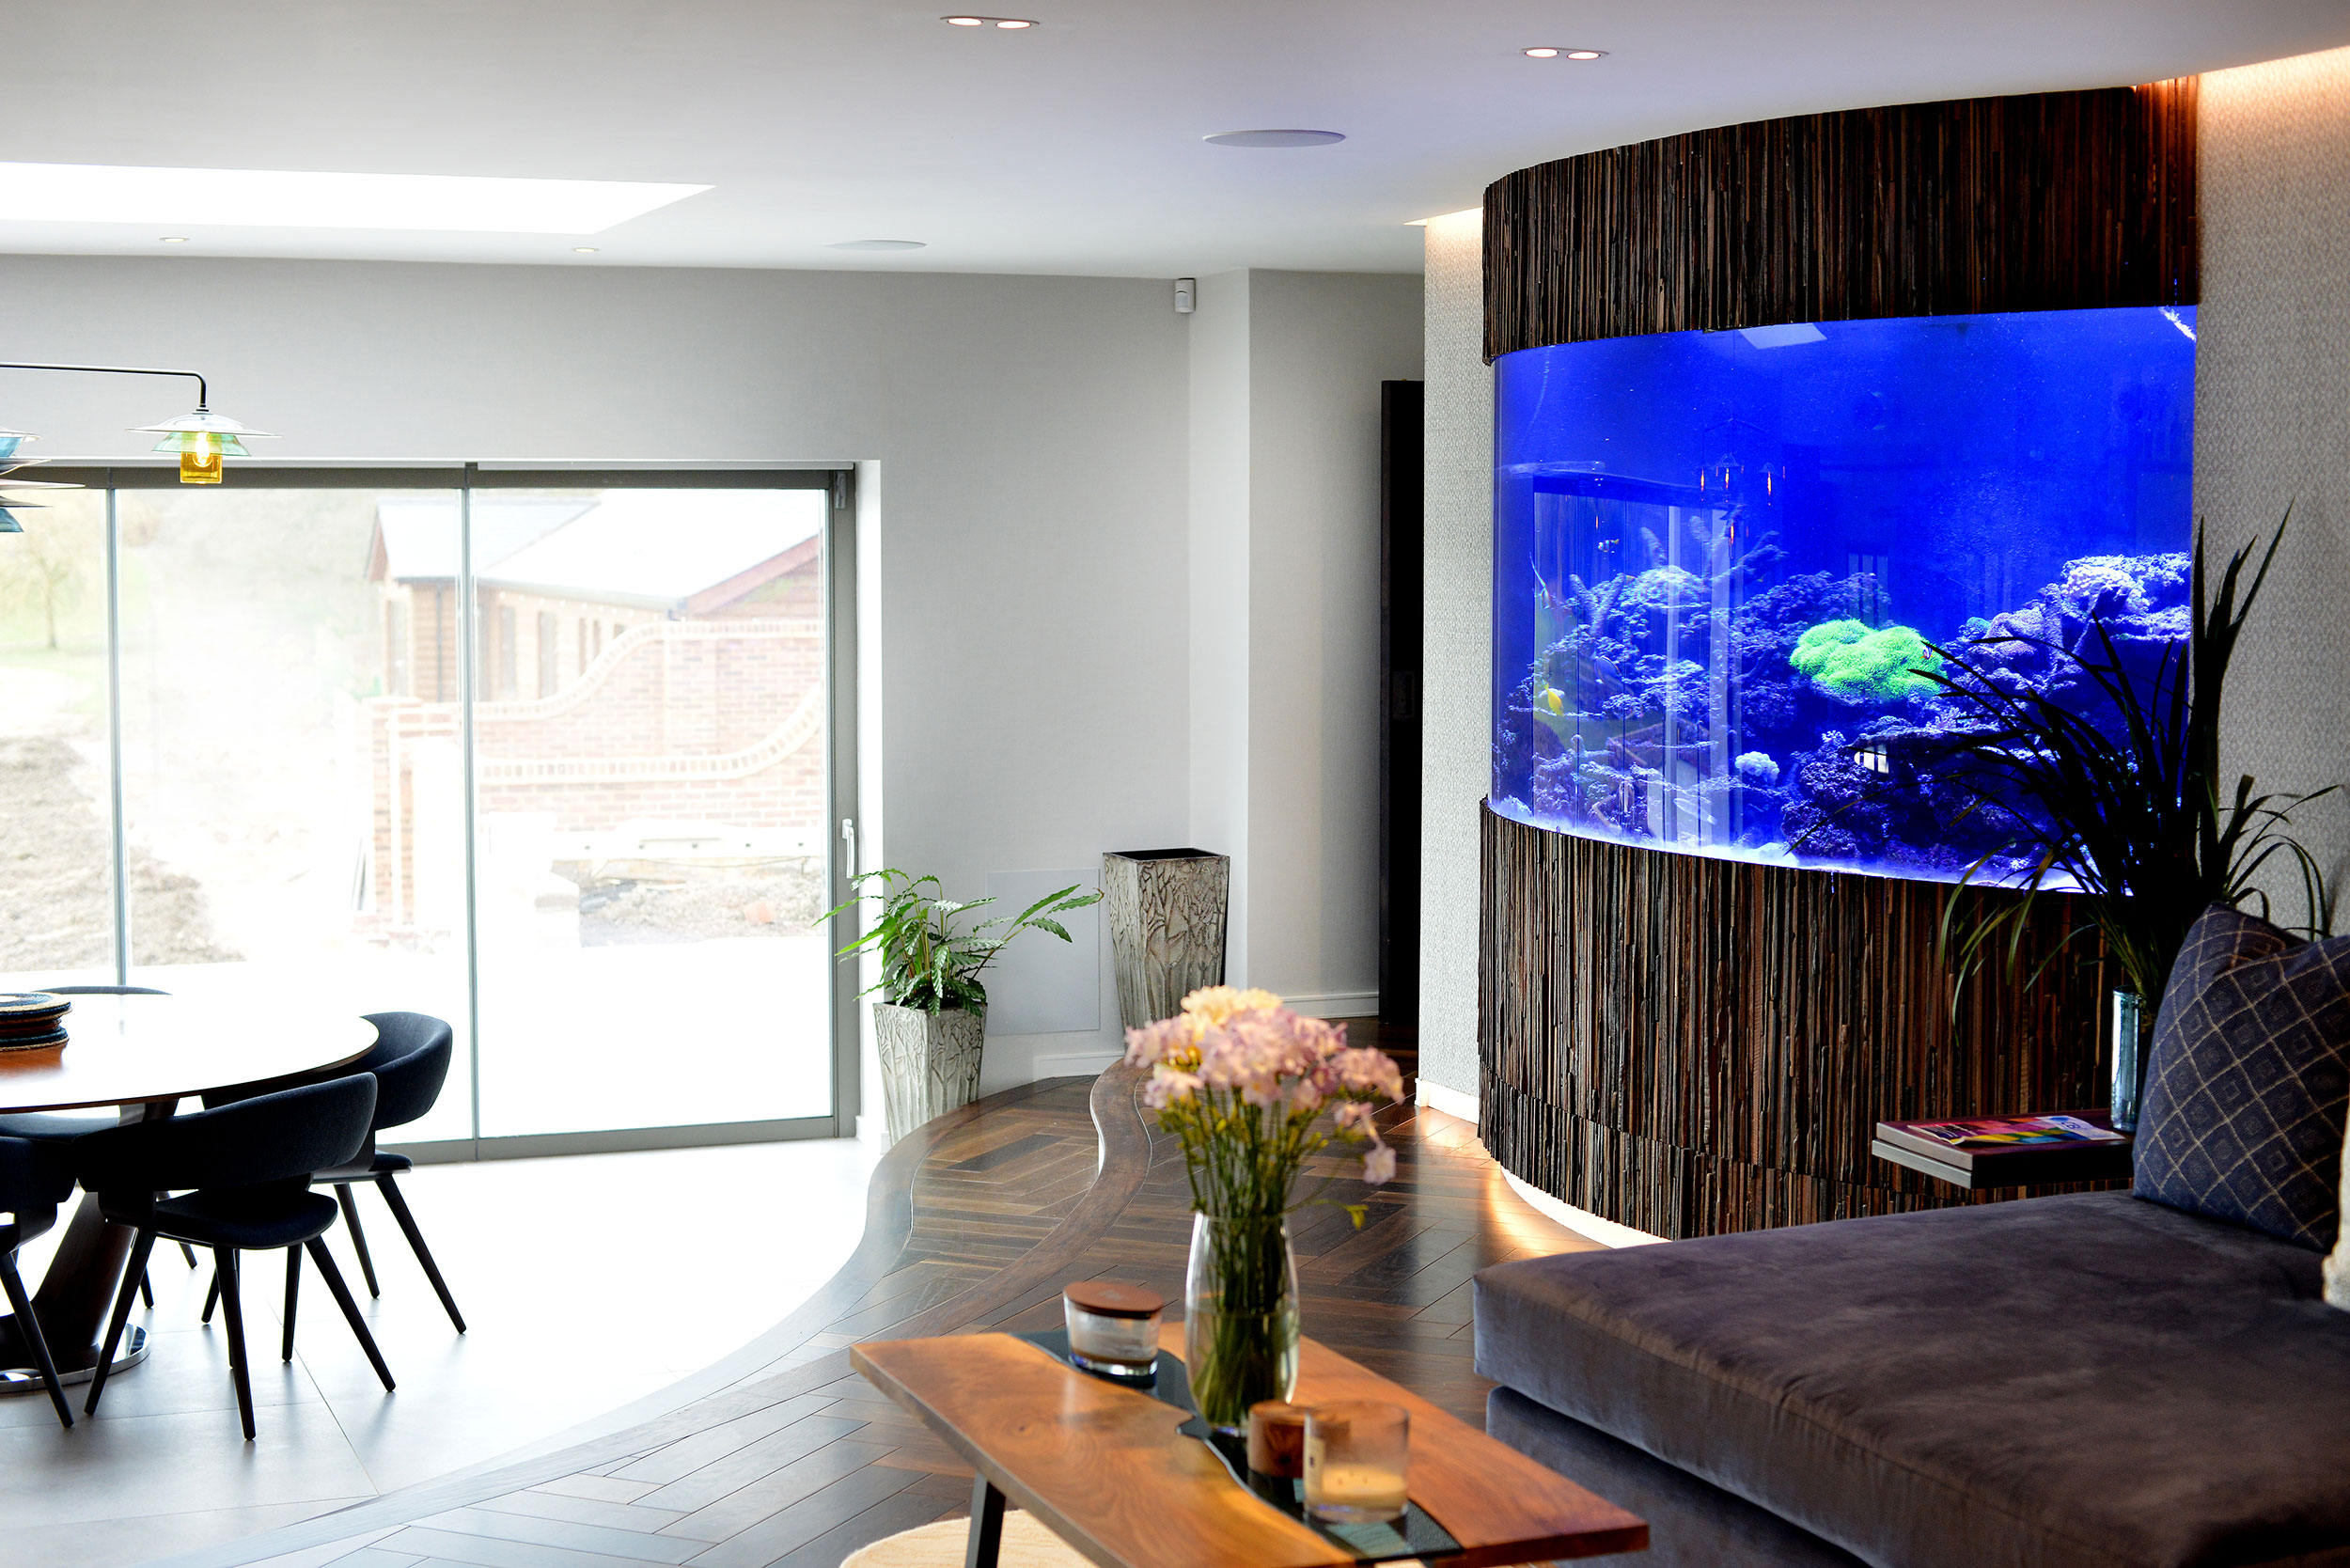  Hampshire Integrated Smart Home gallery image 5